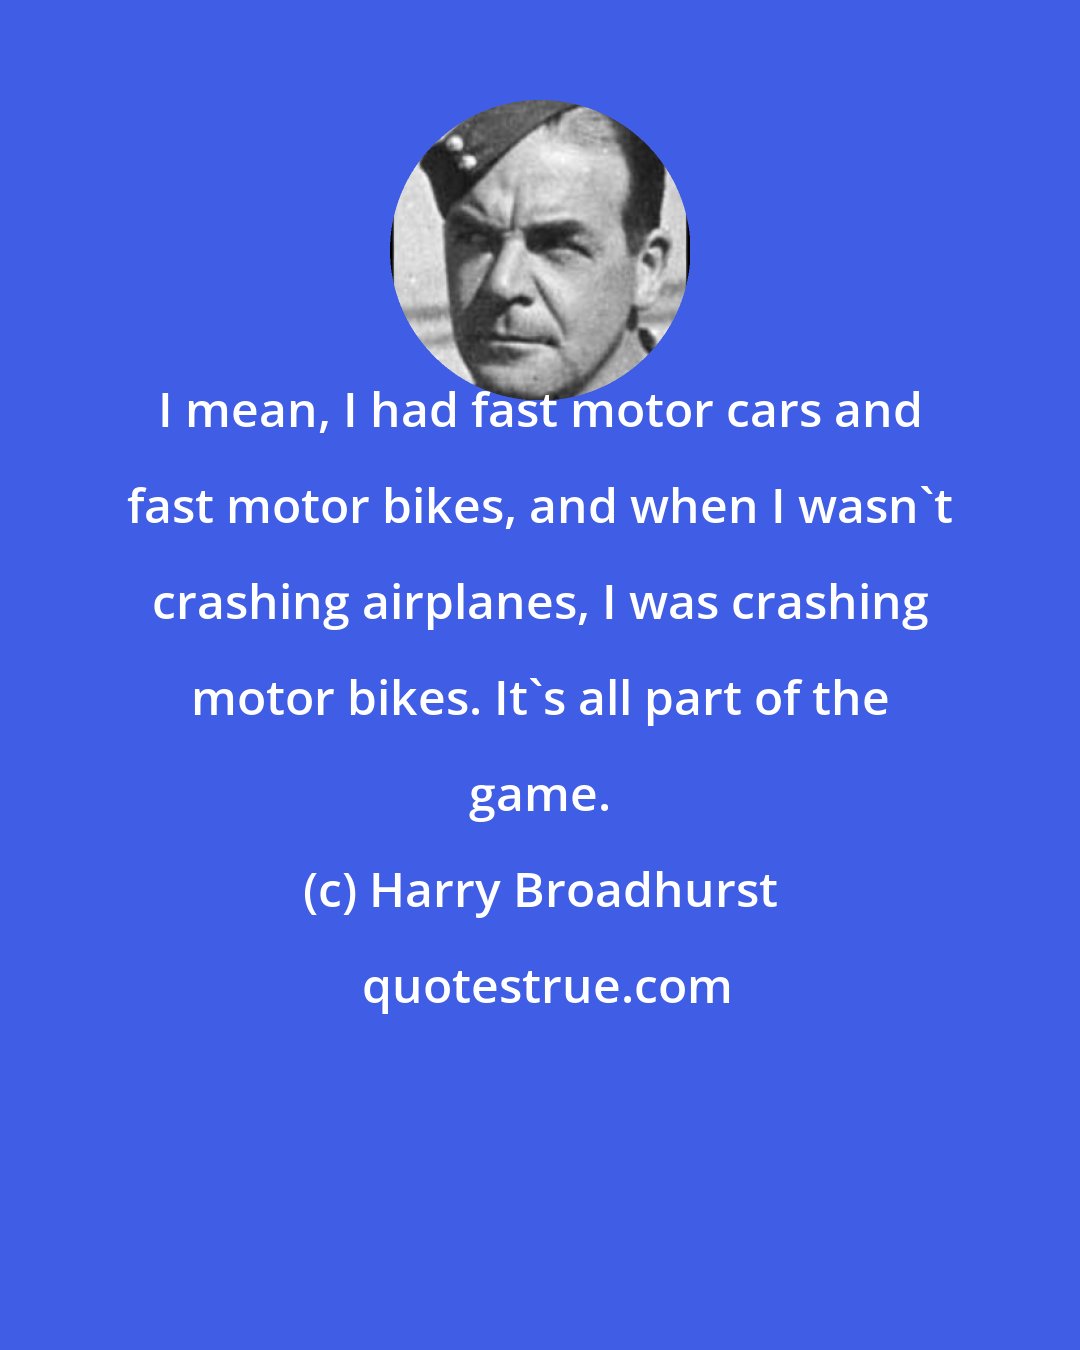 Harry Broadhurst: I mean, I had fast motor cars and fast motor bikes, and when I wasn't crashing airplanes, I was crashing motor bikes. It's all part of the game.